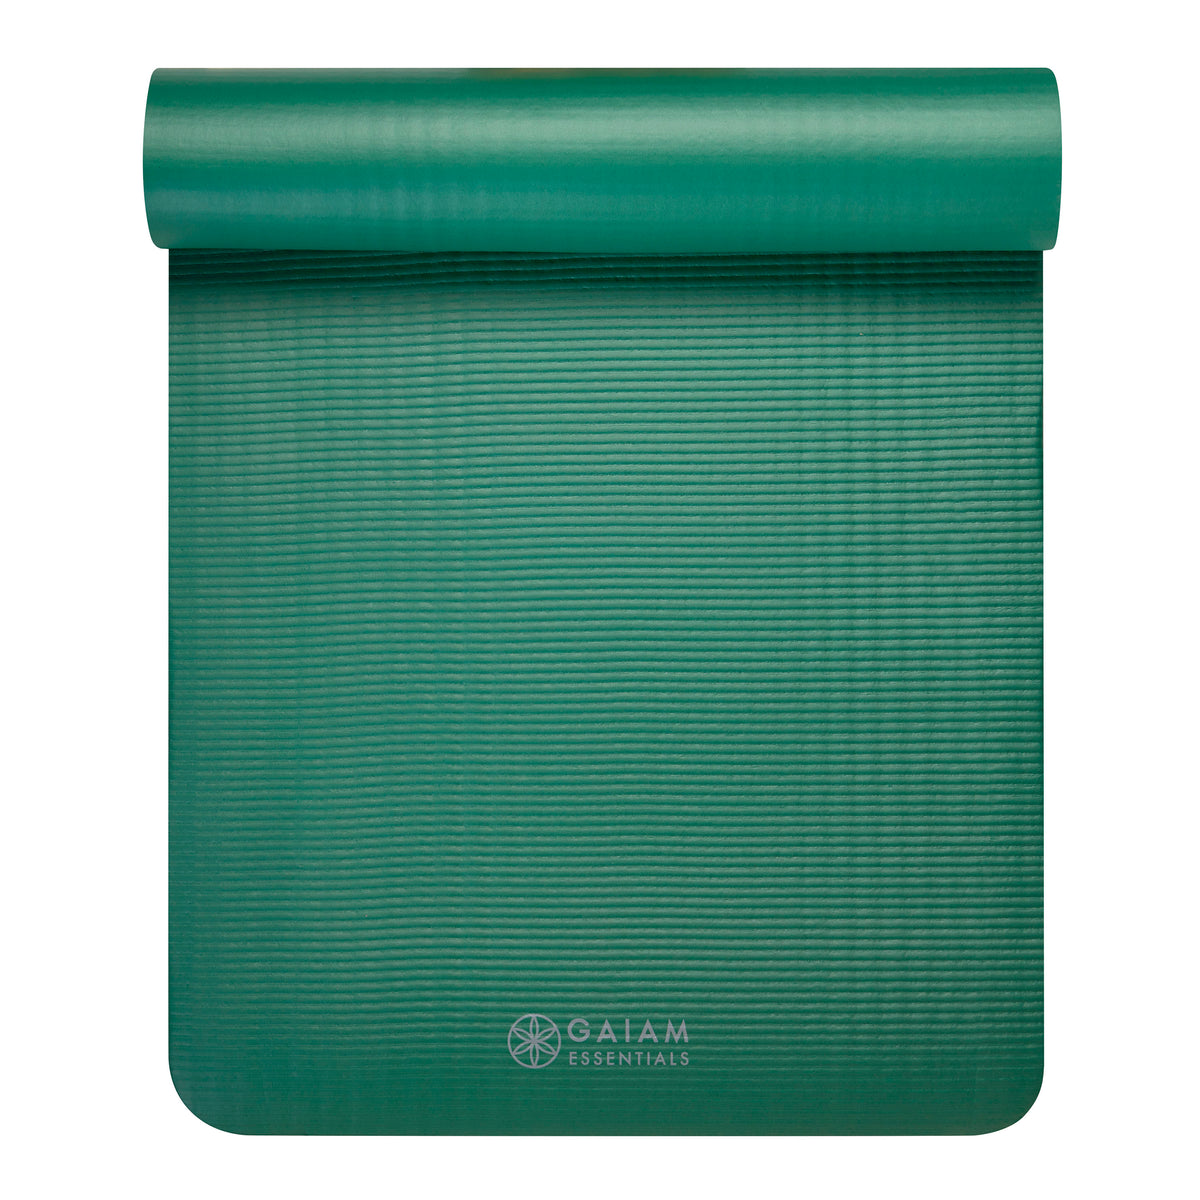 Gaiam Essentials Yoga Fitness & Exercise Mat, Teal, 72 L x 24 W x 10mm  Thick : : Home & Kitchen